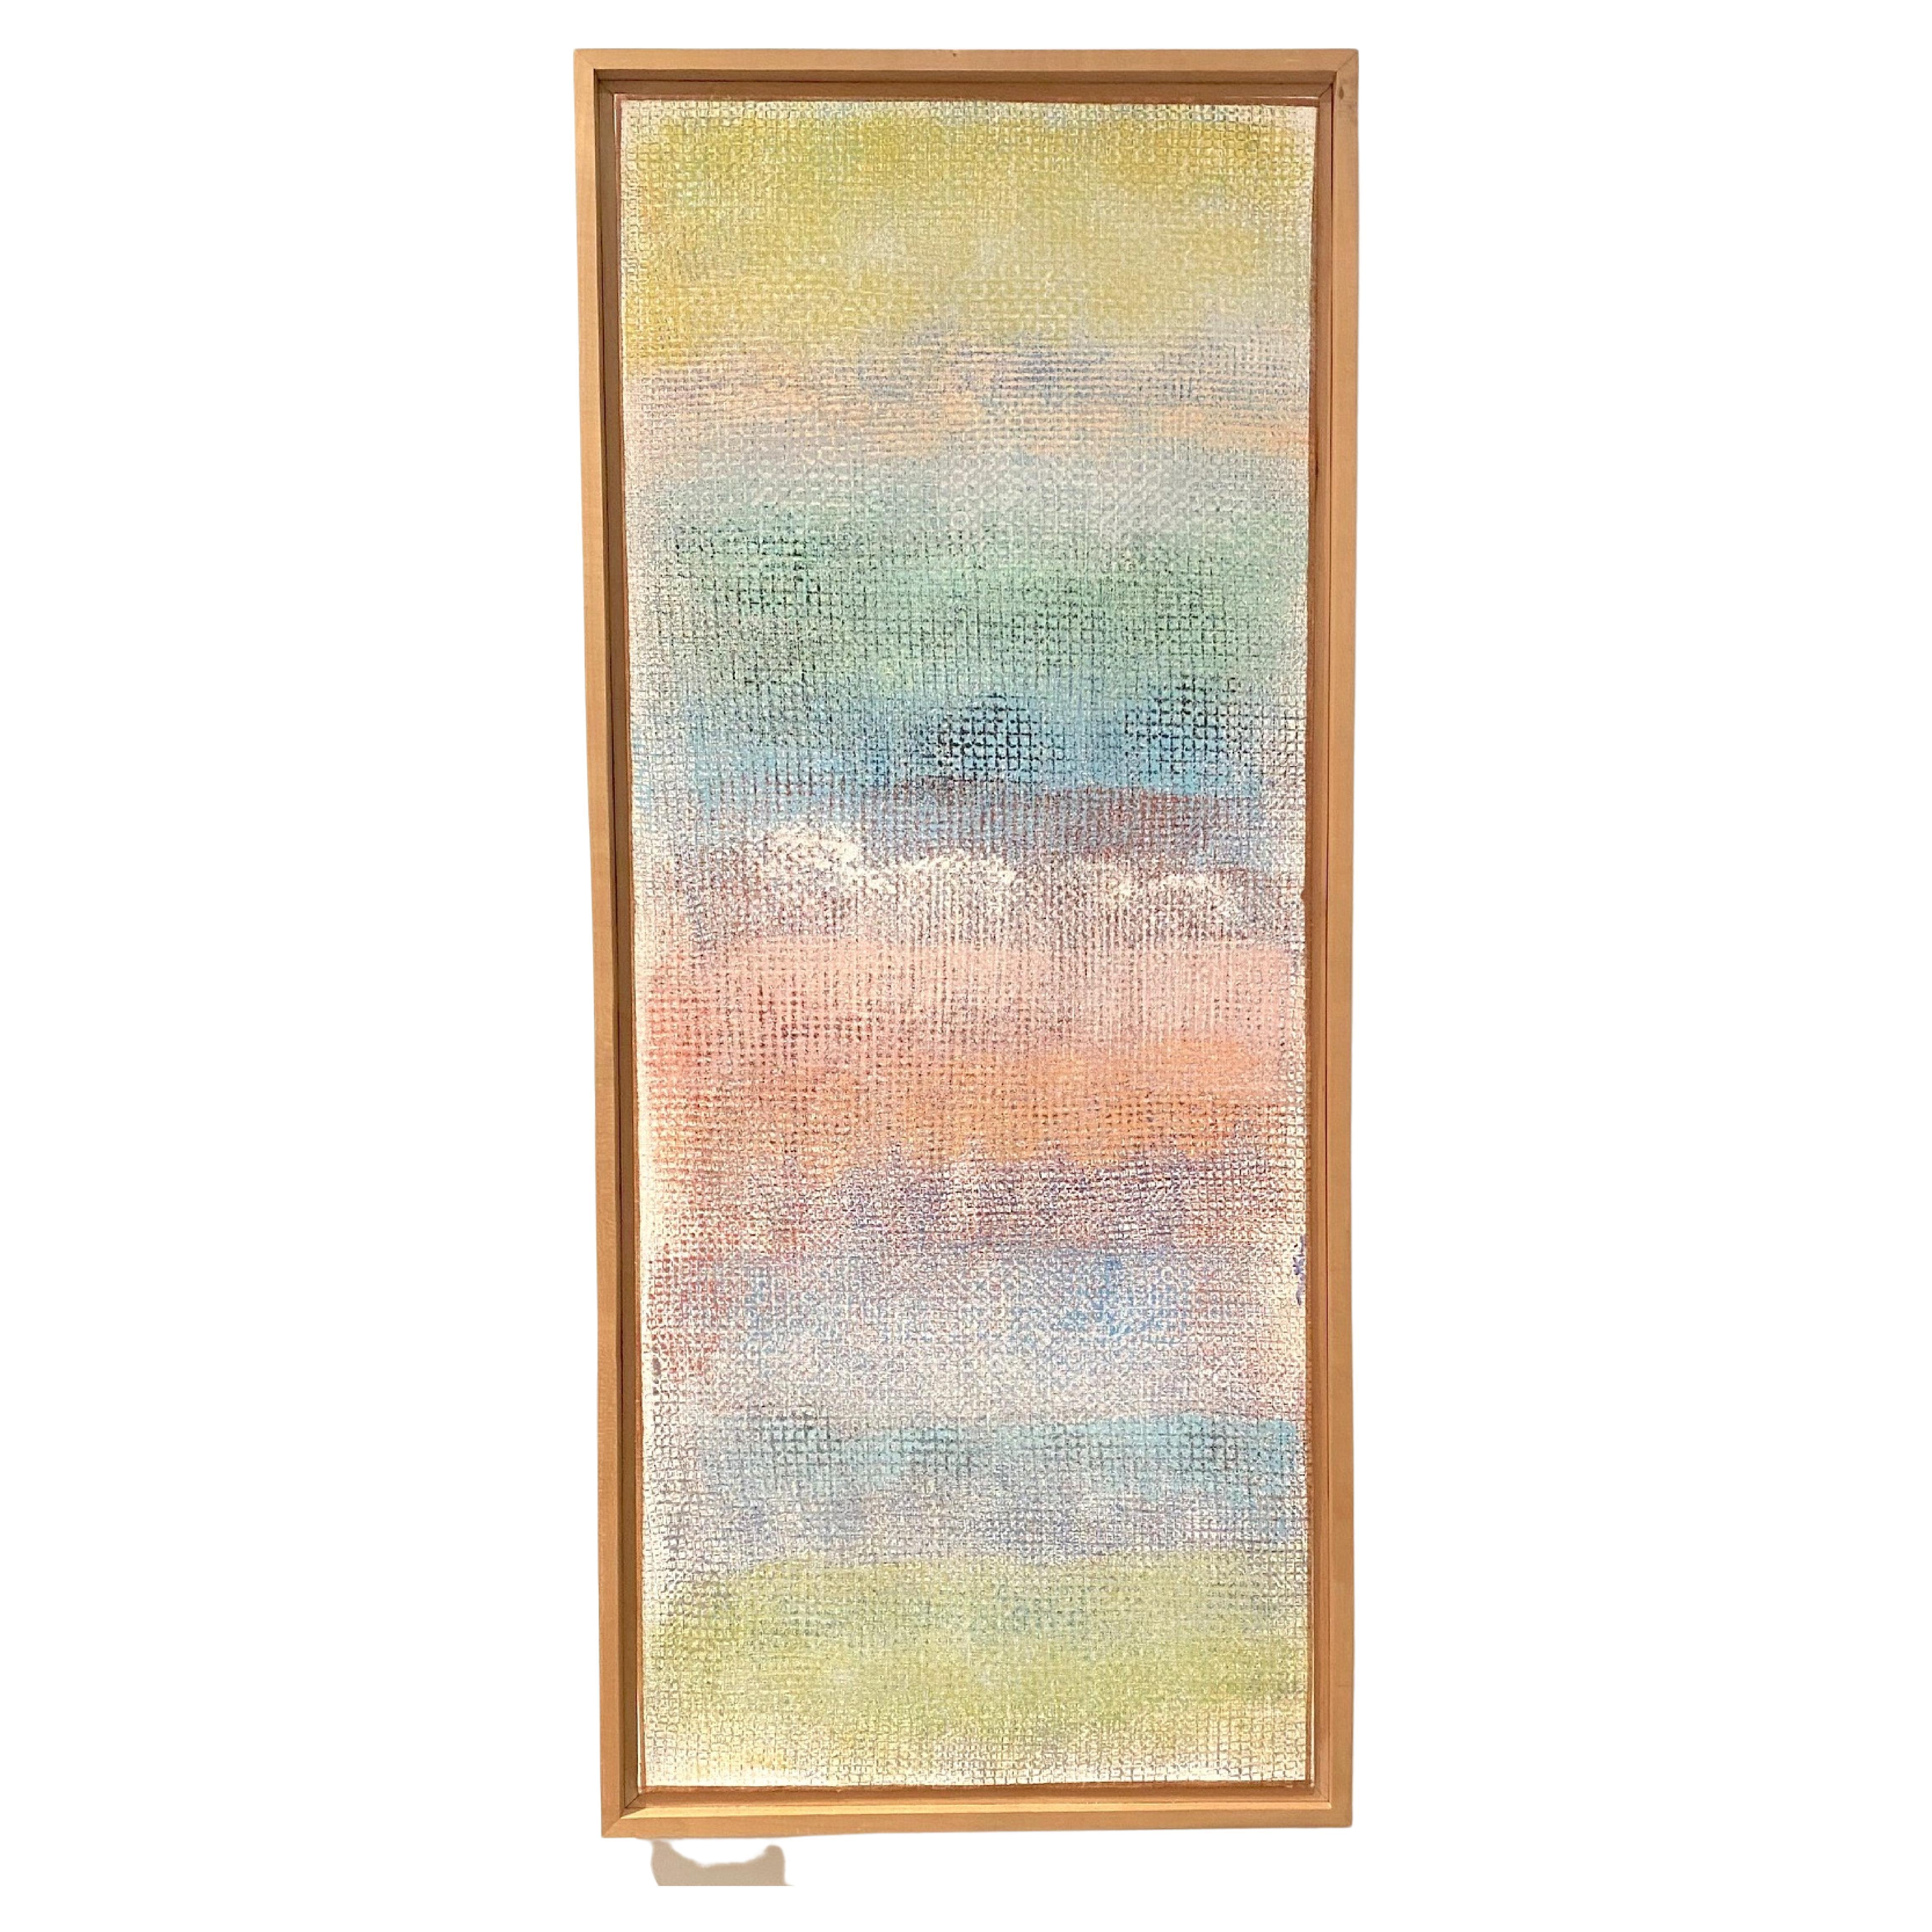 Framed Robert Natkin Abstract Painting on Canvas in Pastel Tones For Sale